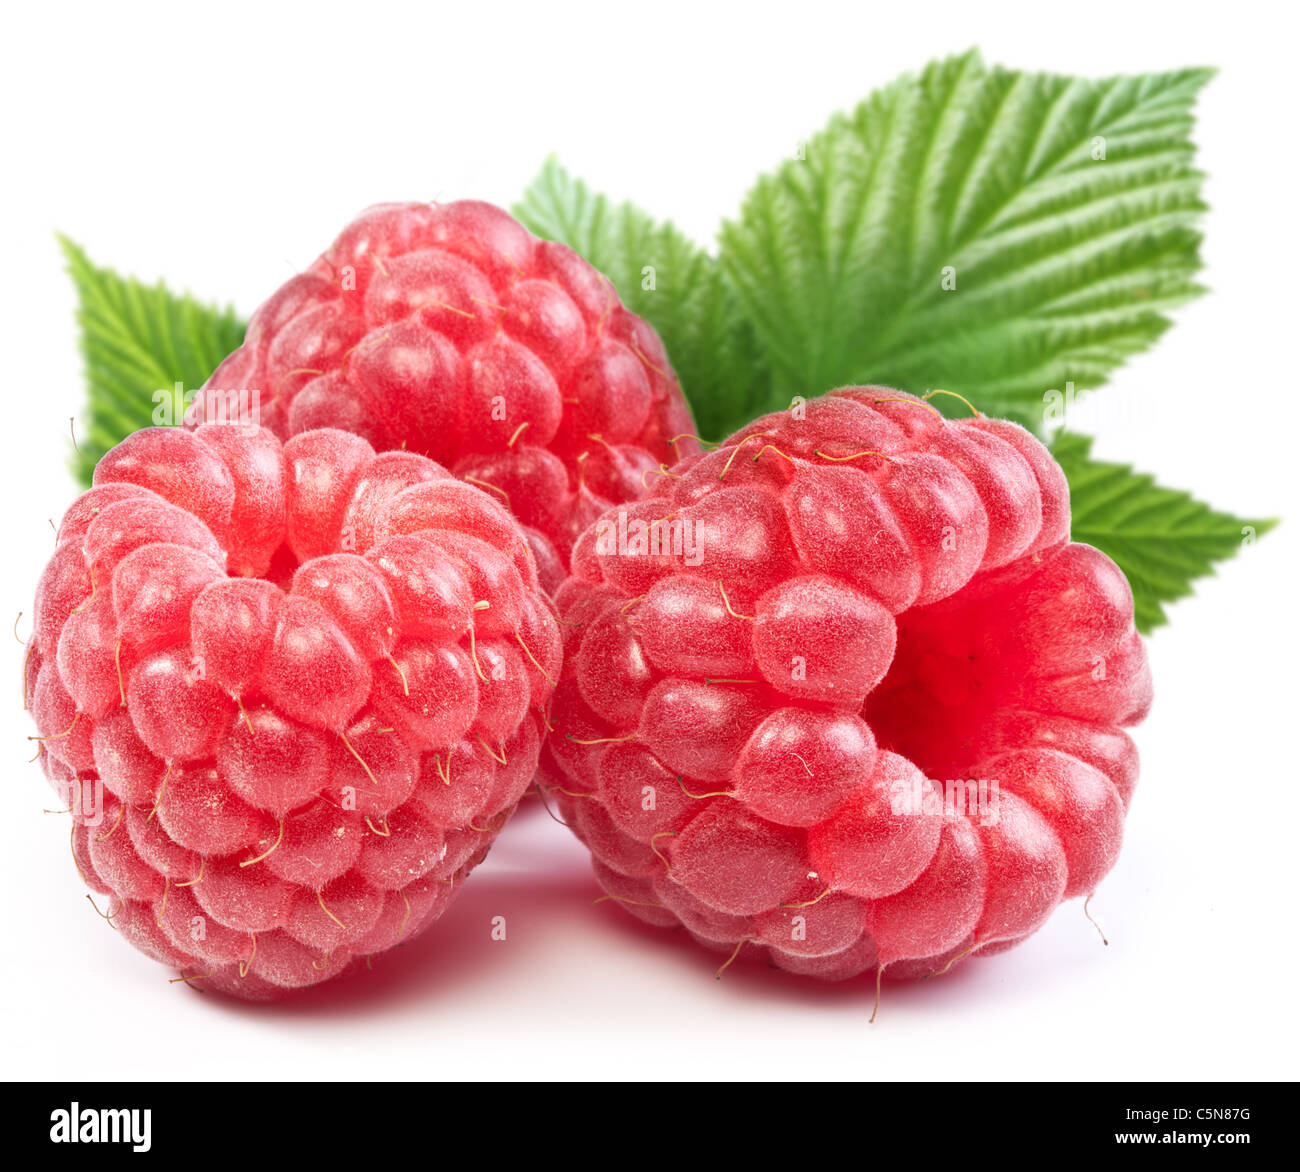 Three perfect ripe raspberries. Isolated on a white background. Stock Photo